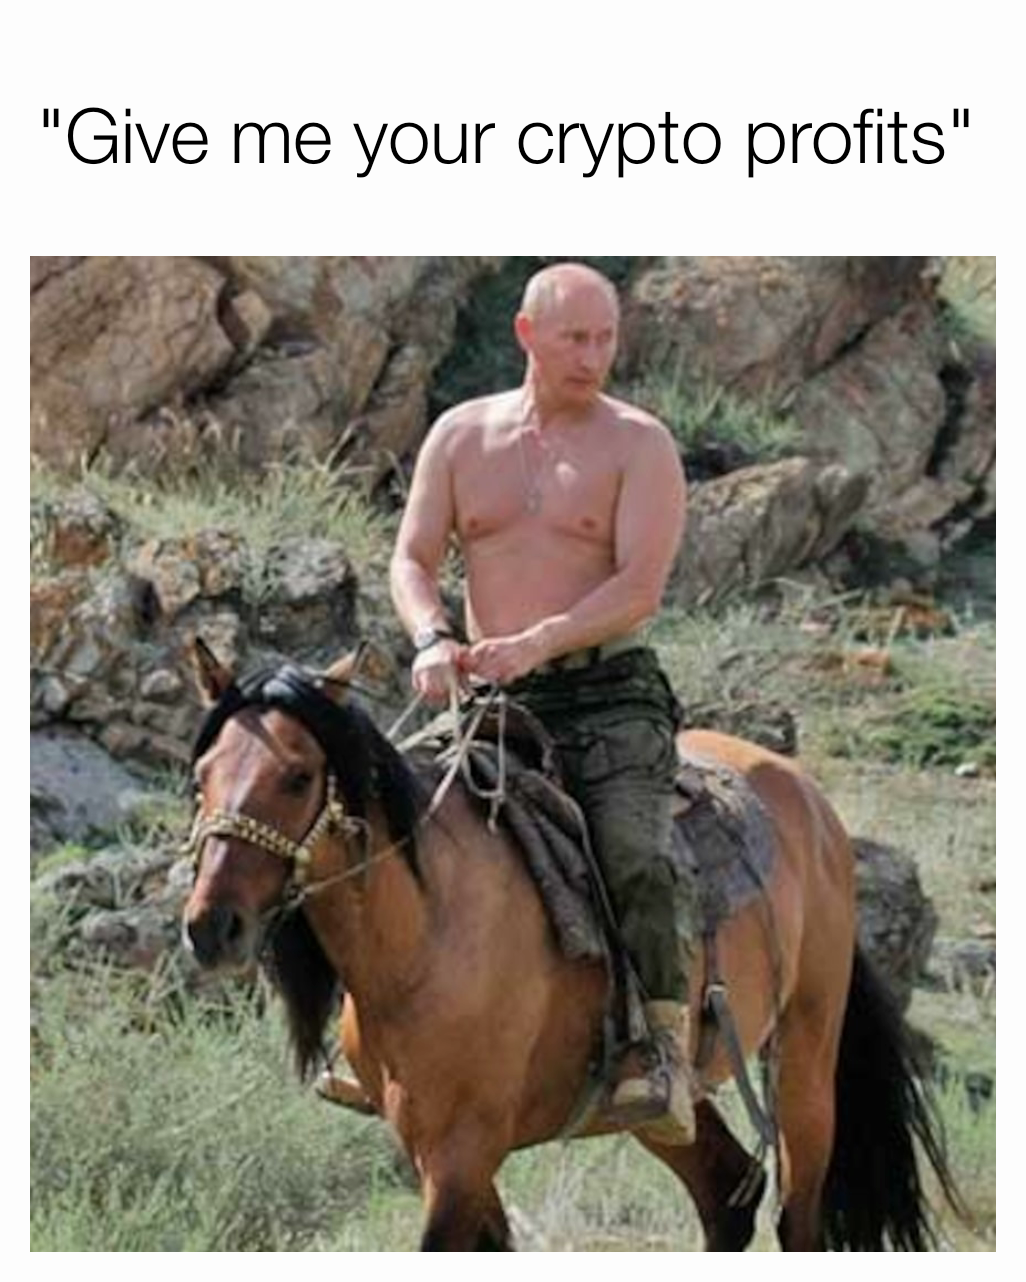 "Give me your crypto profits"